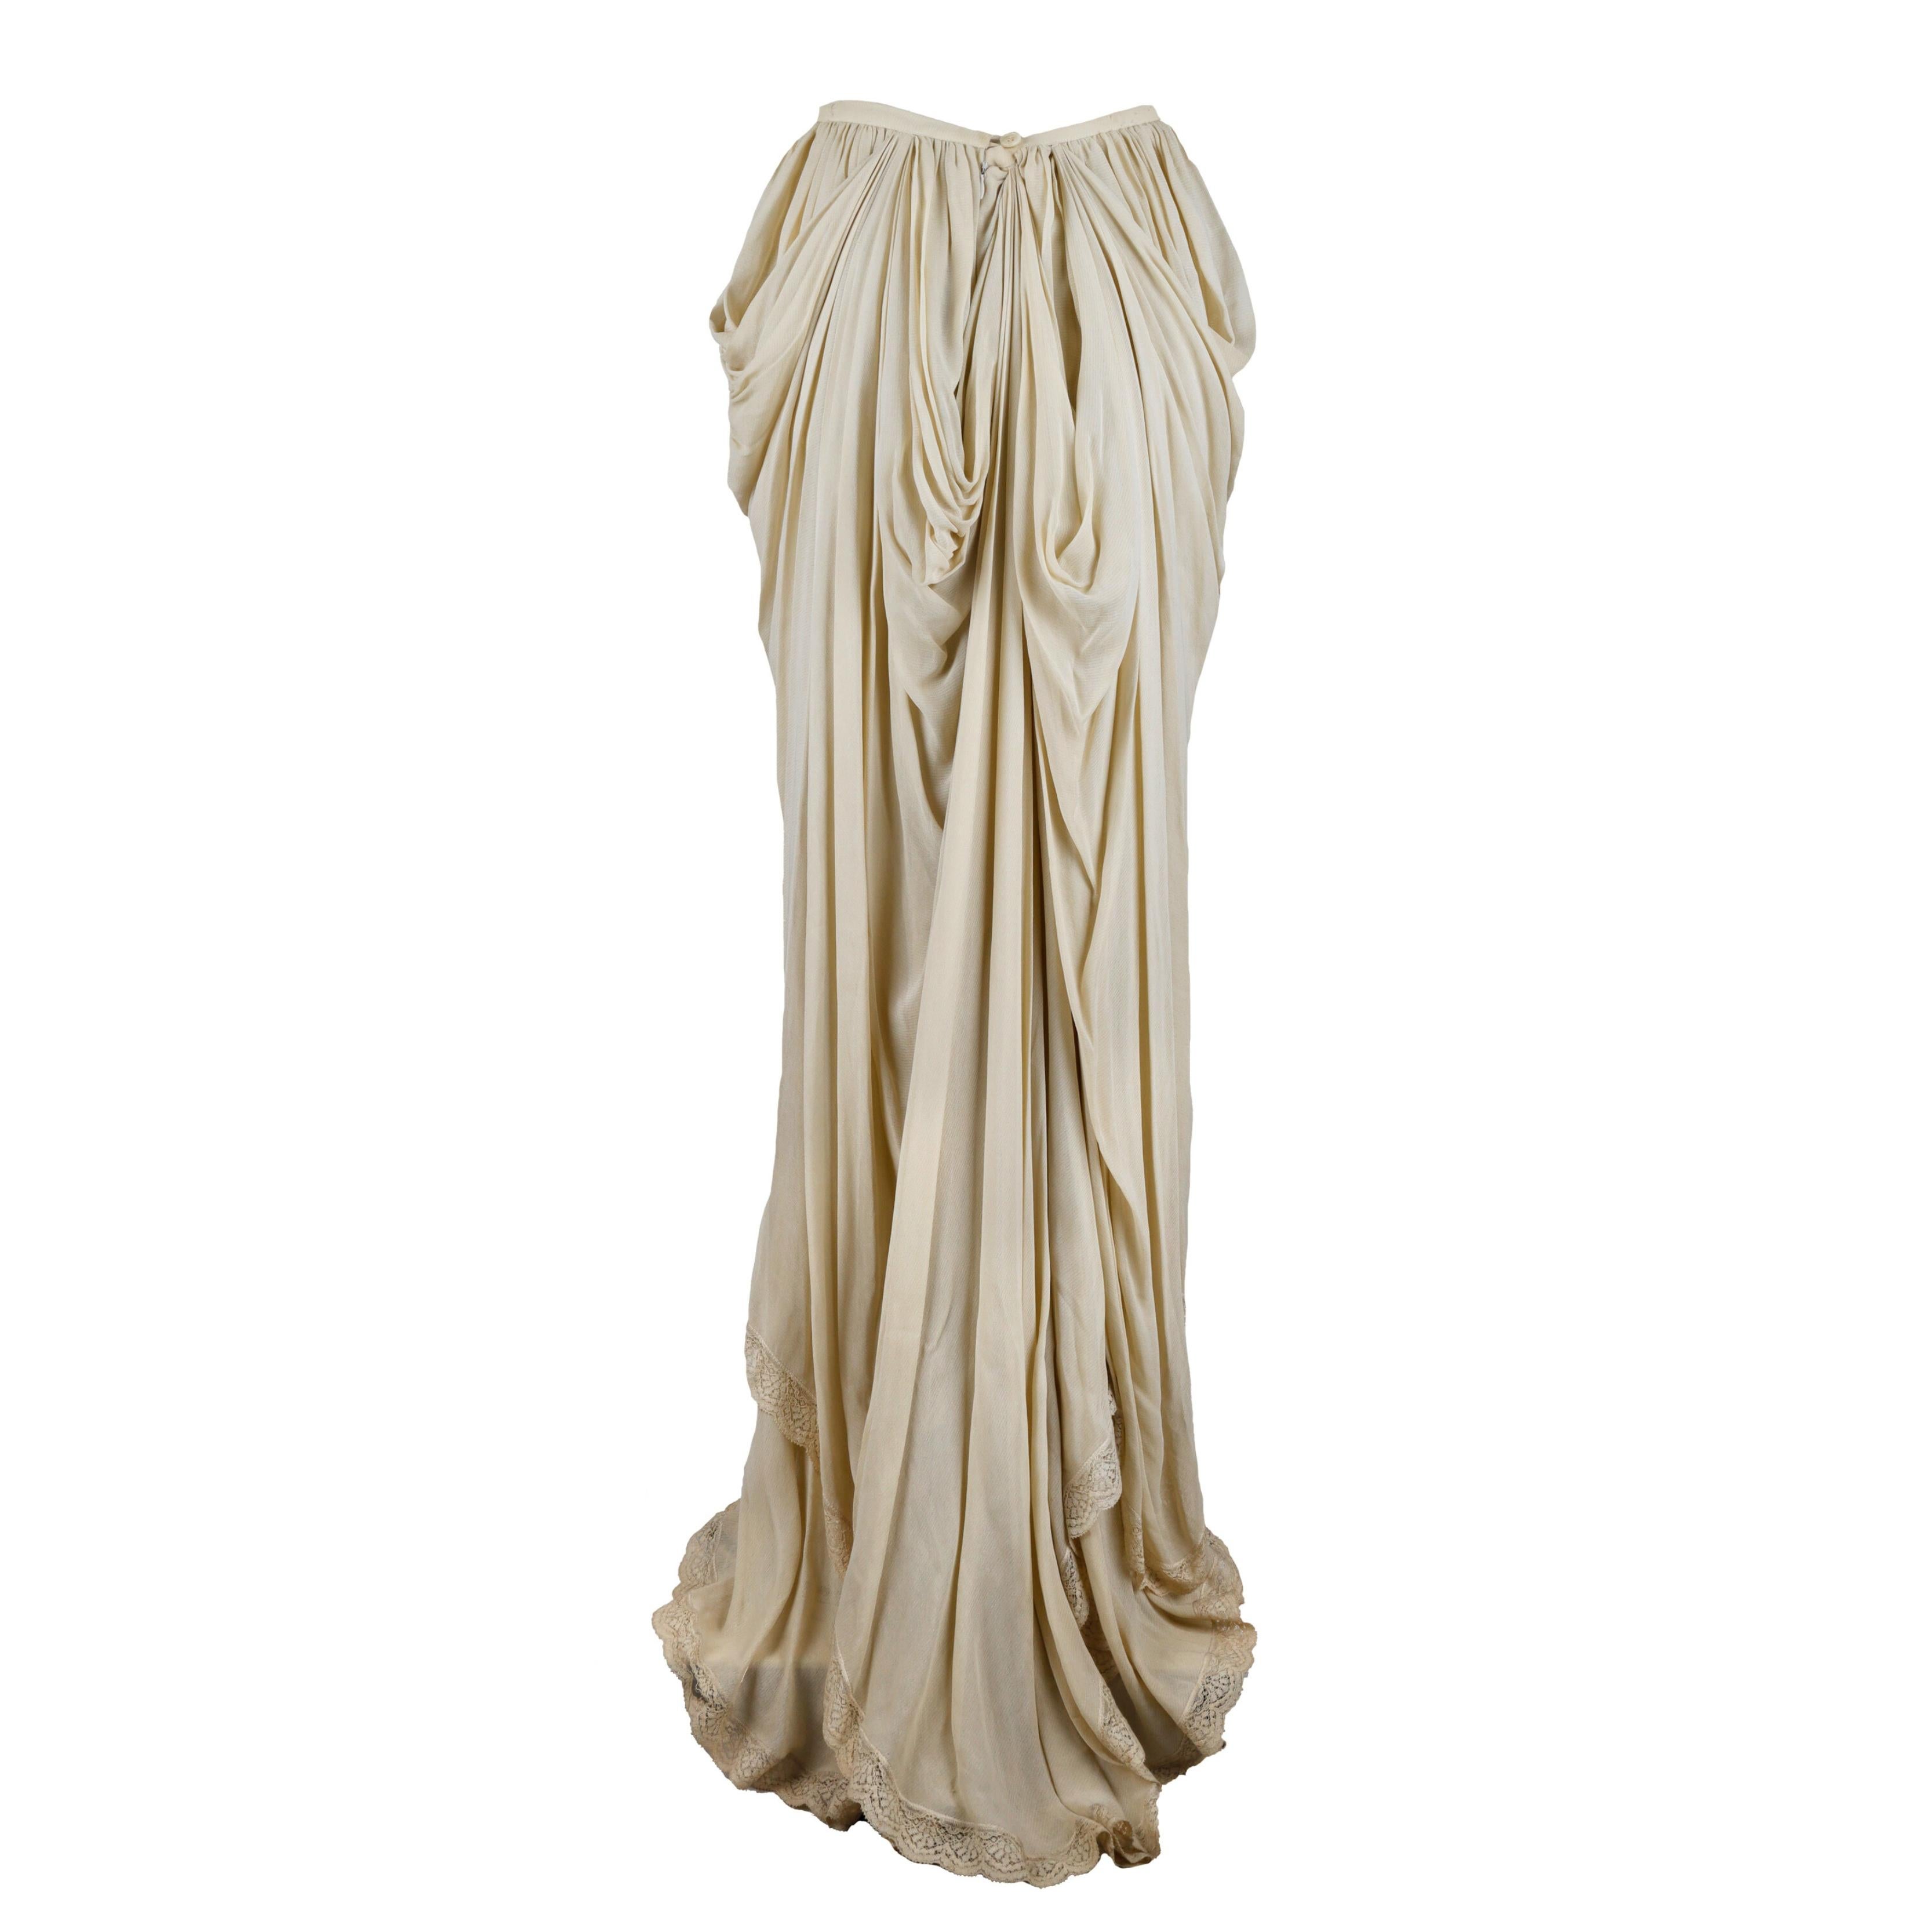 This Dolce & Gabbana Ruched Layer Skirt is crafted from a viscose blend in a light beige shade, featuring lavish ruches and layers that evoke the look of Roman sculptures. With delicate lace trimming at the hem, this one-of-a-kind skirt will give